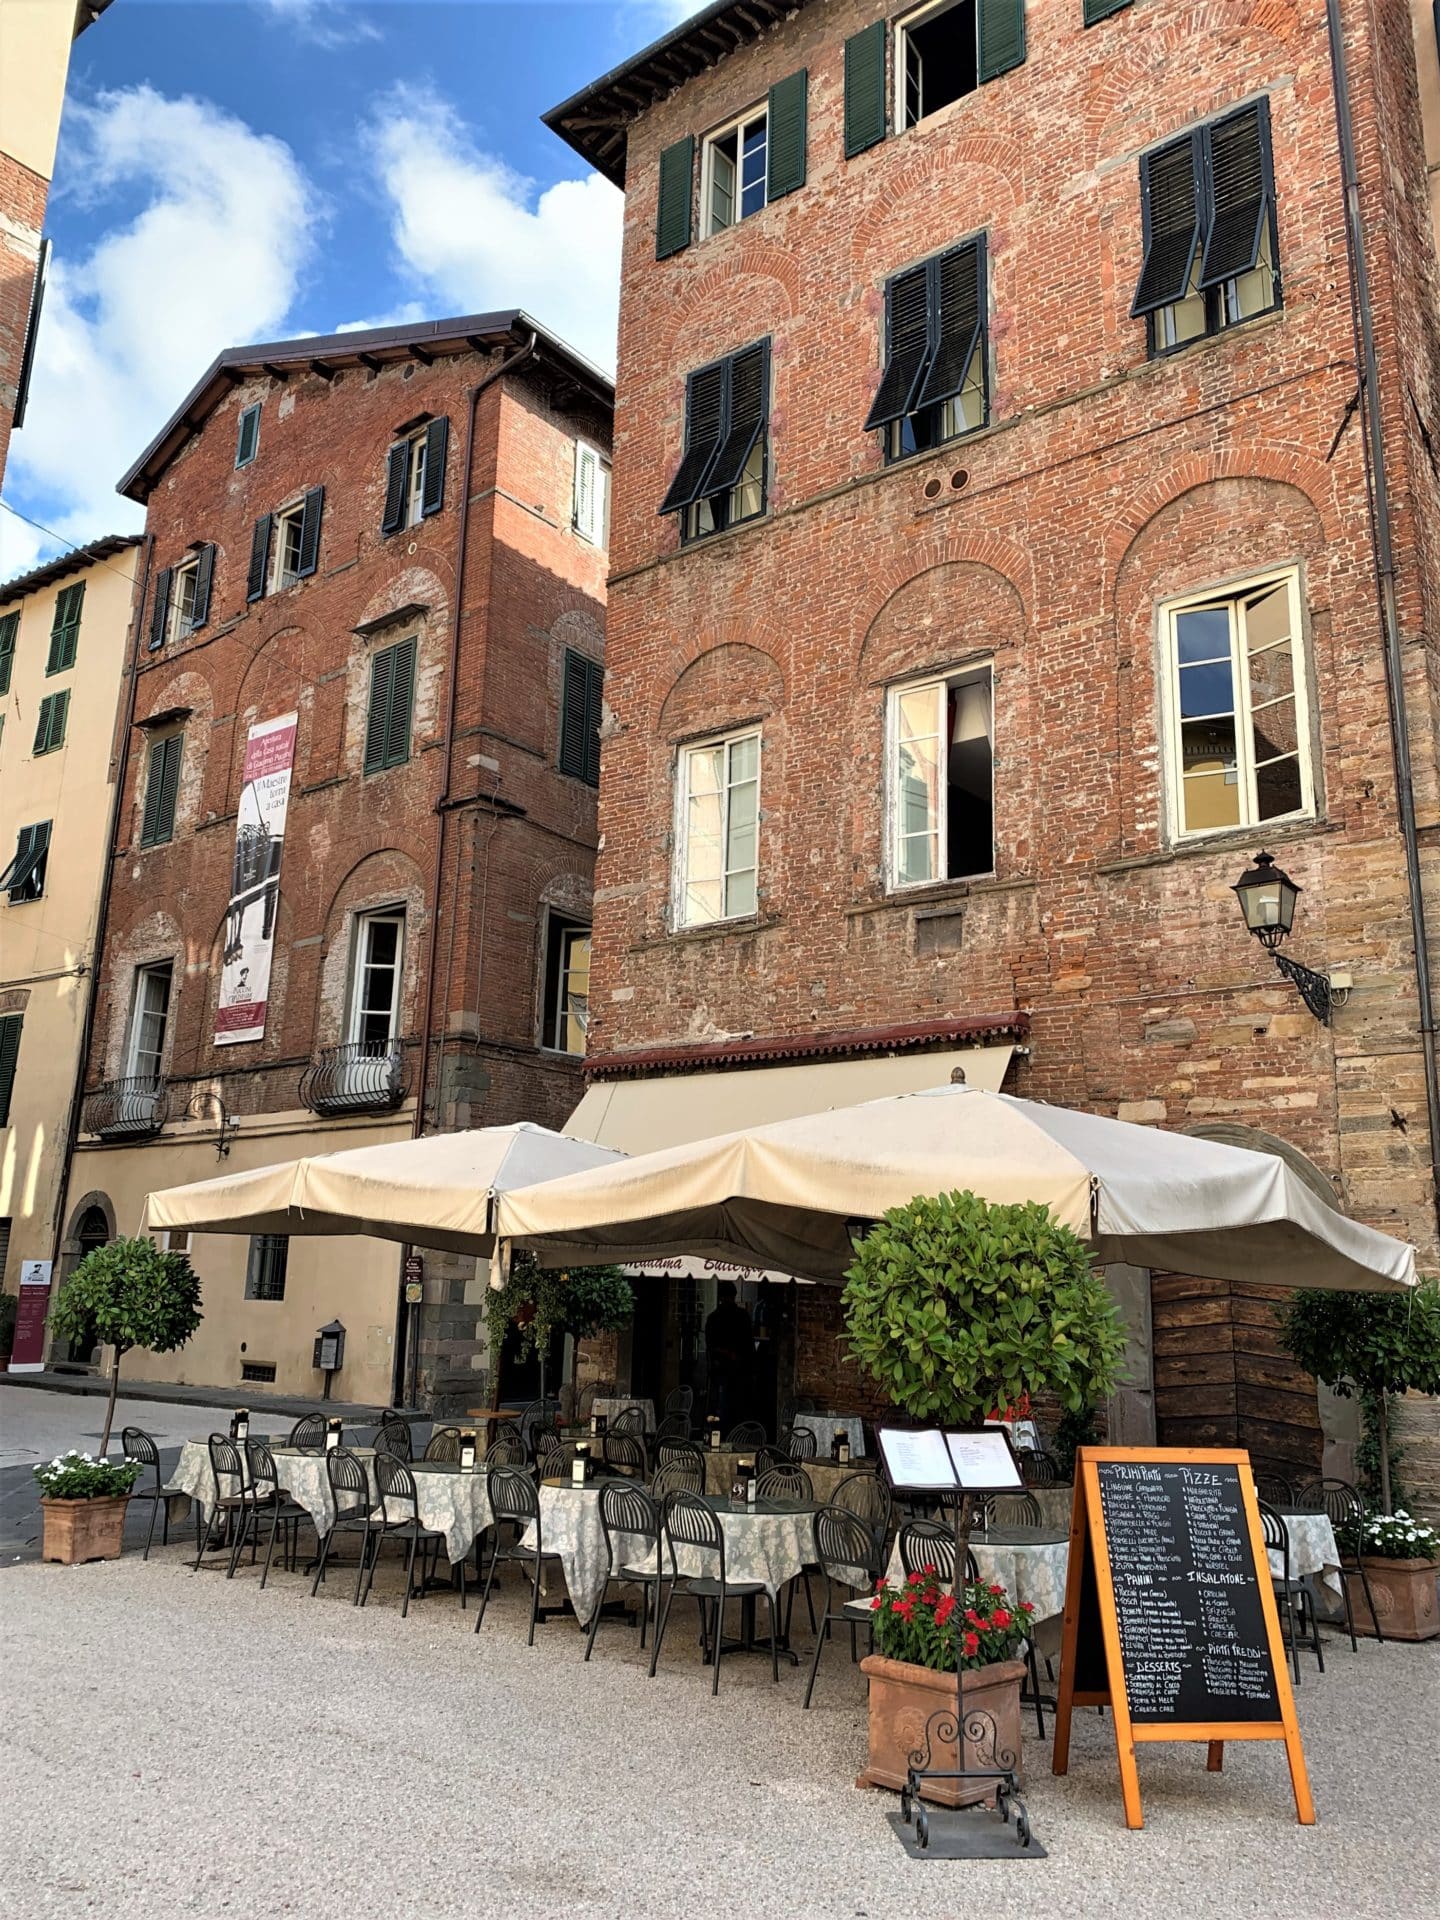 How to Spend a Day in Lucca, Tuscany